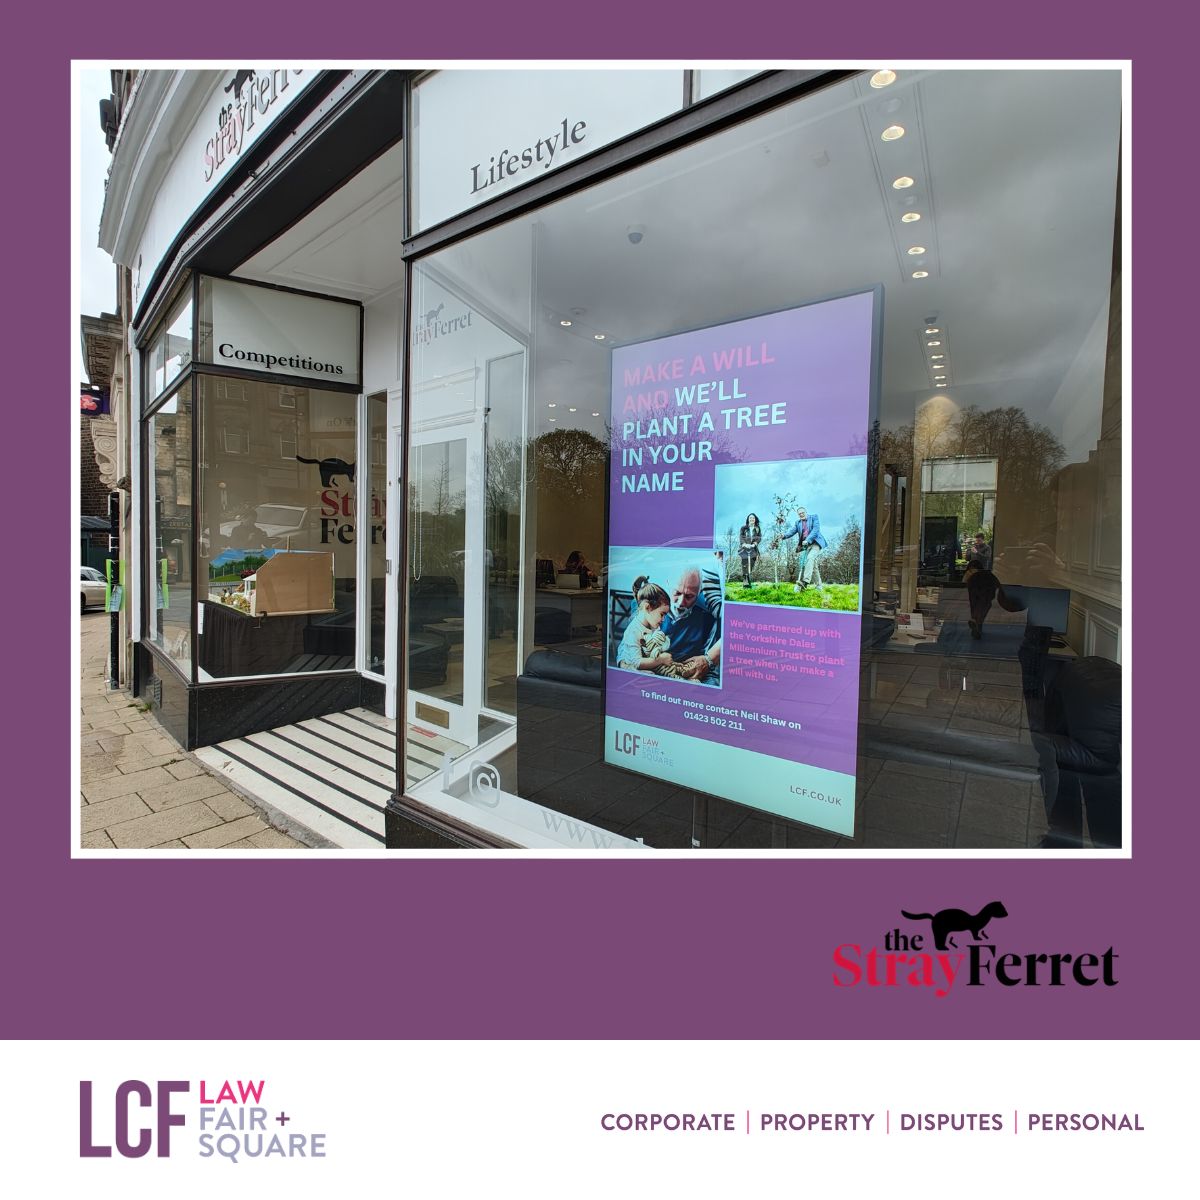 Delighted to be featured in the front window of @thestrayferret's fabulous new #Harrogate premises. 🙏

When you make or update a will with us in 2024, we'll plant a tree in your name 👉 lcf.co.uk/personal-servi…

#PartnershipWorking #Wills #TreePlanting #LawFairSquare